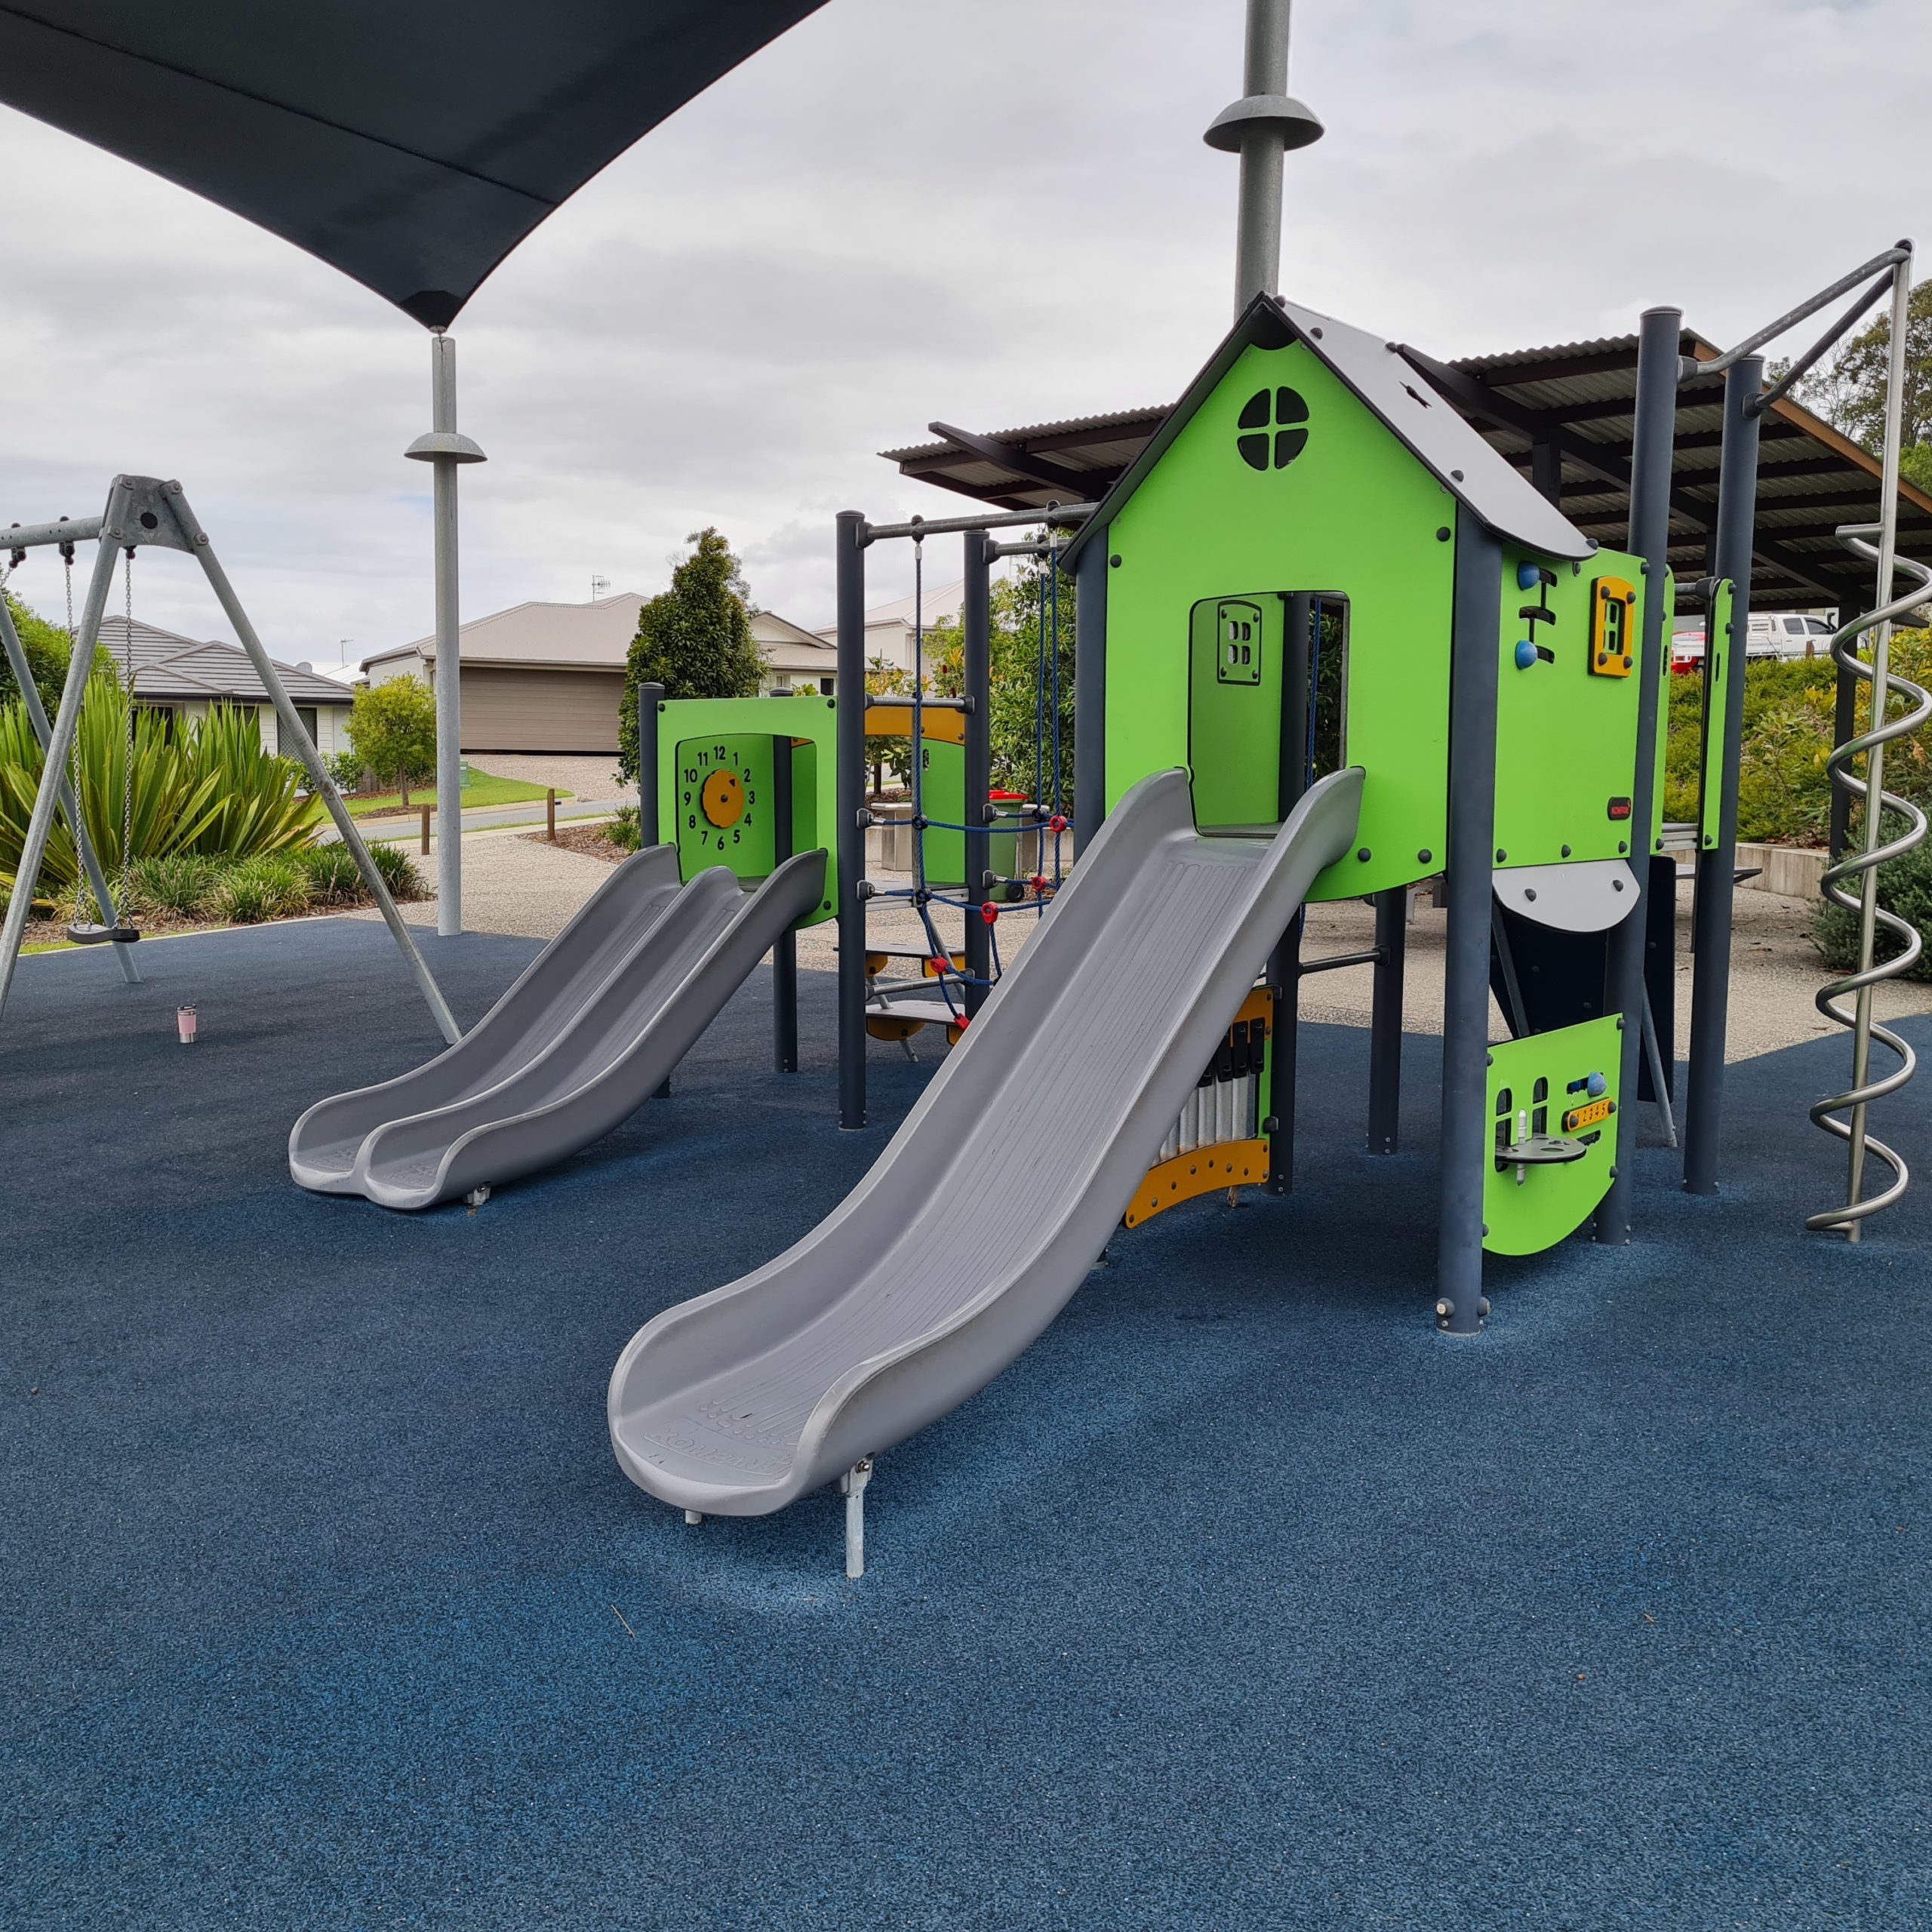 Best Toddler Playgrounds near me